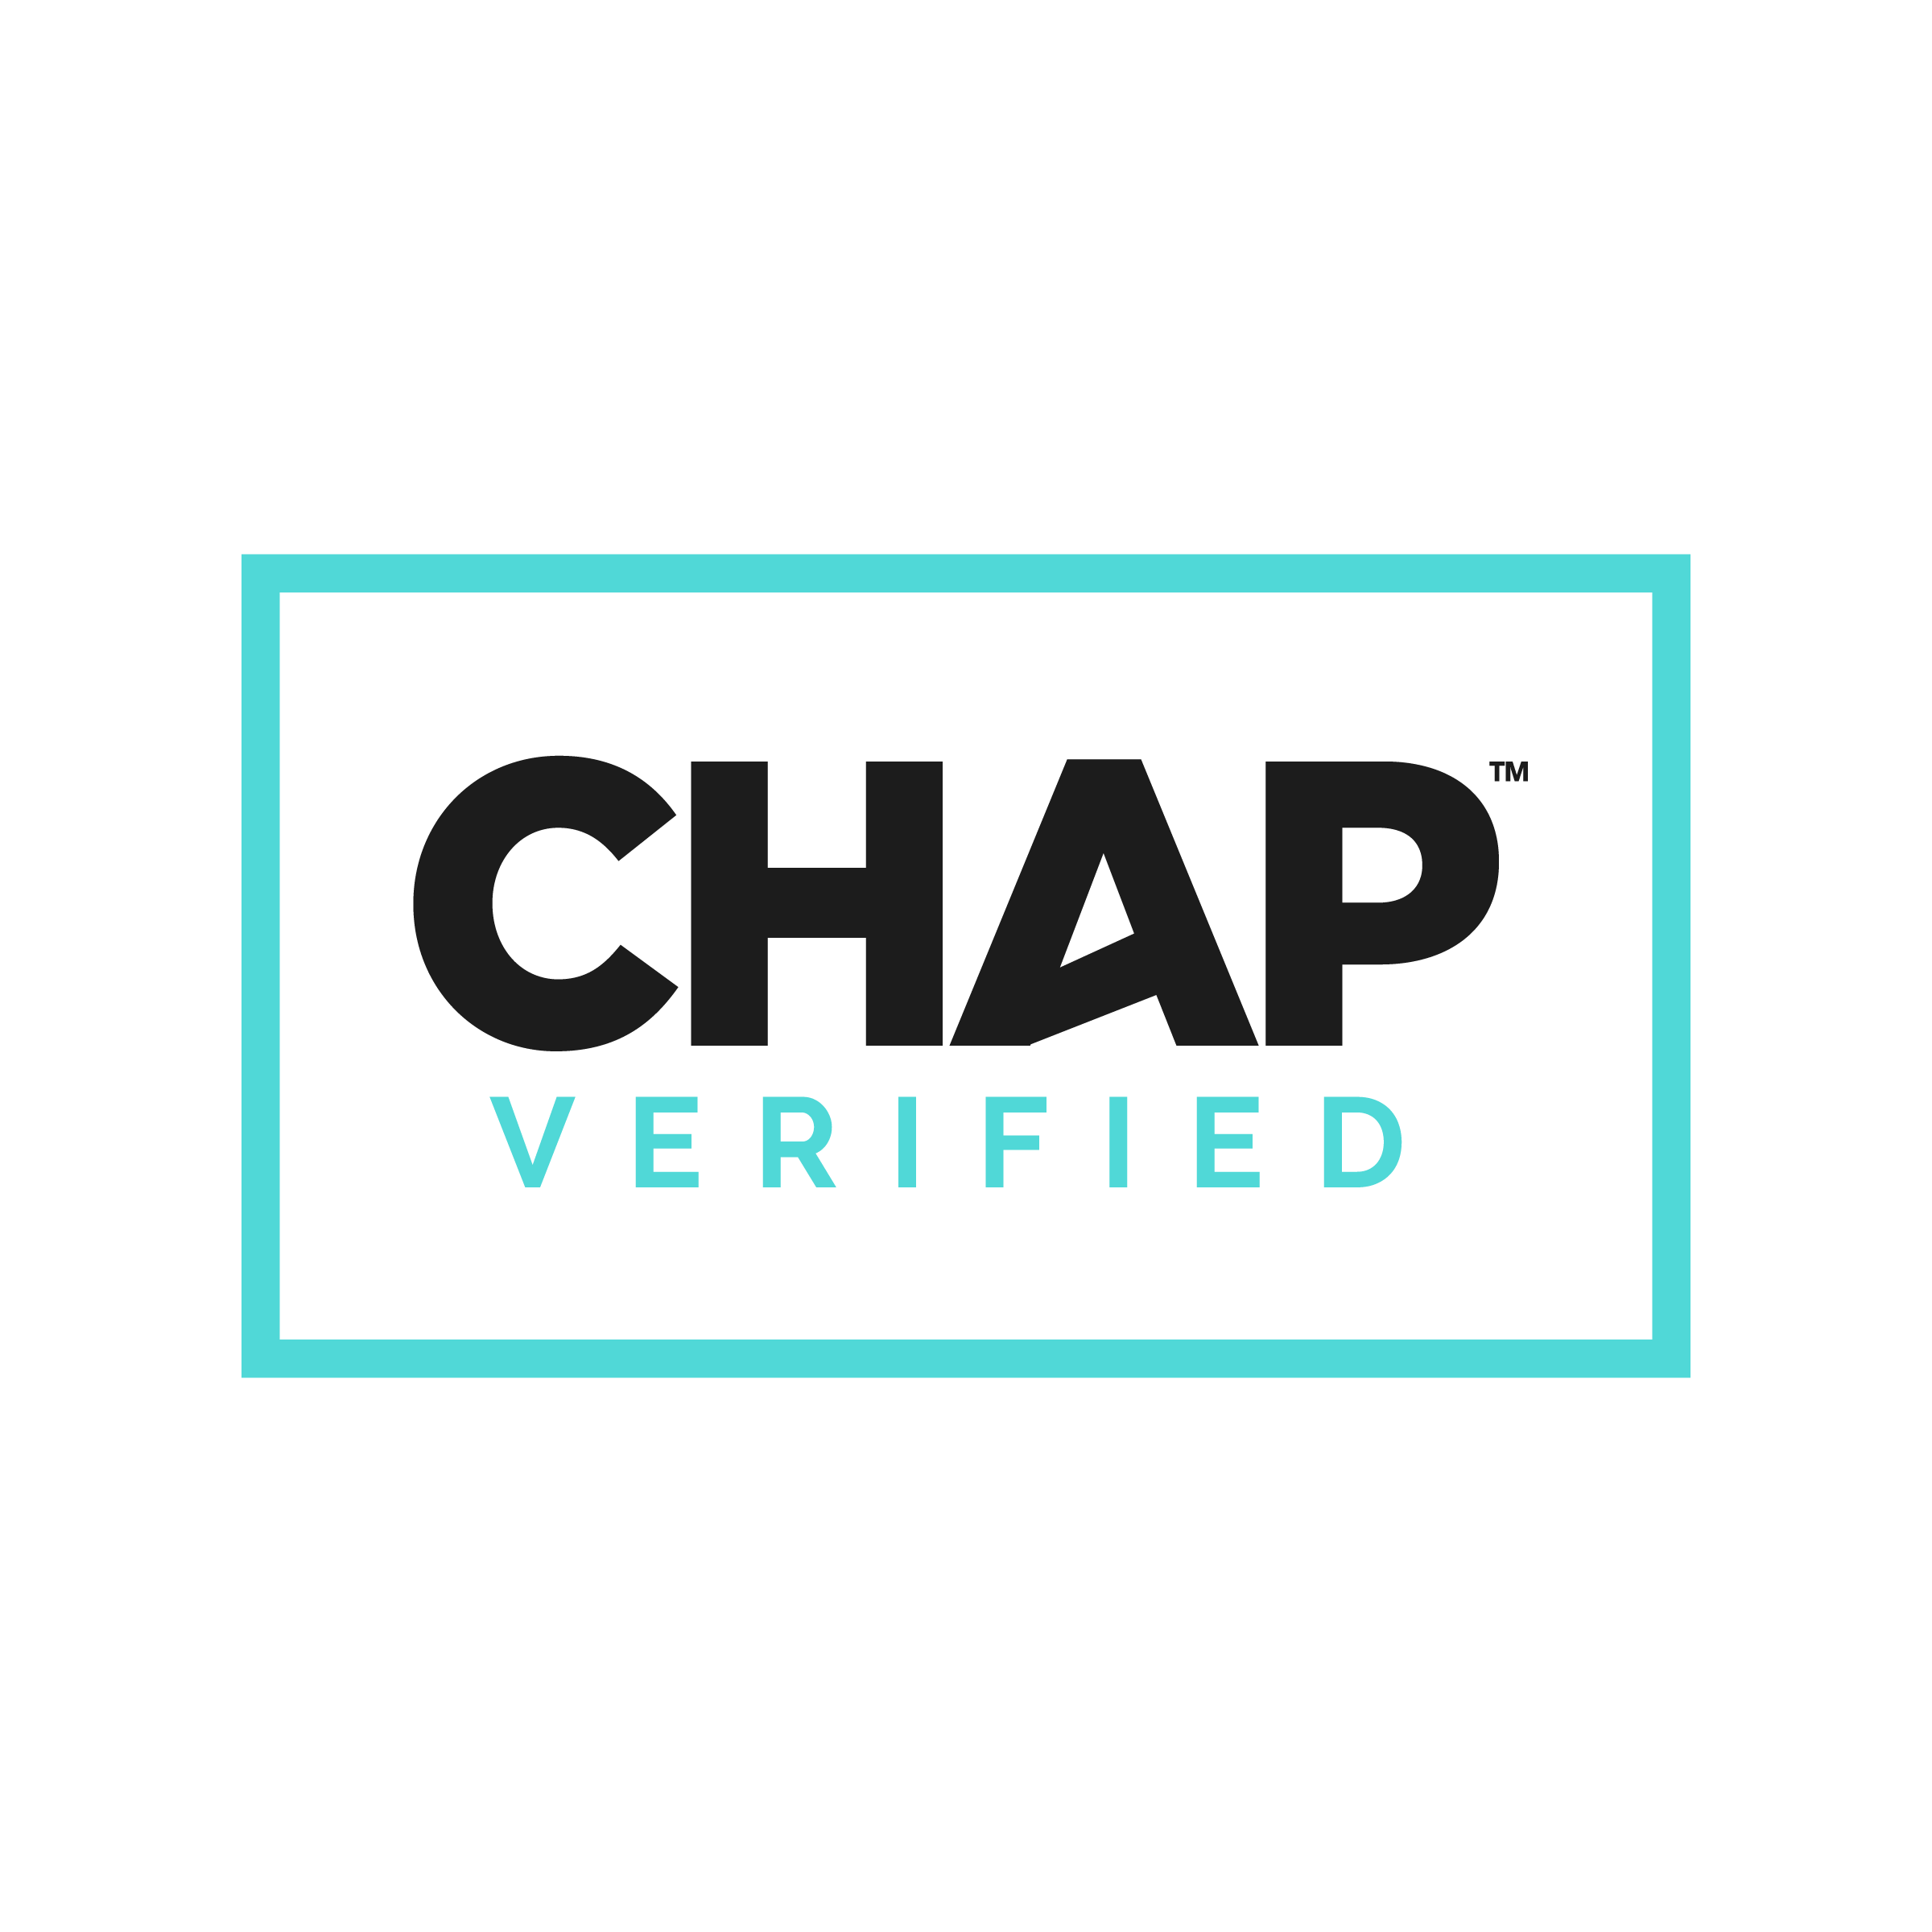 Hospice Tools EMR Awarded “CHAP VERIFIED” Seal